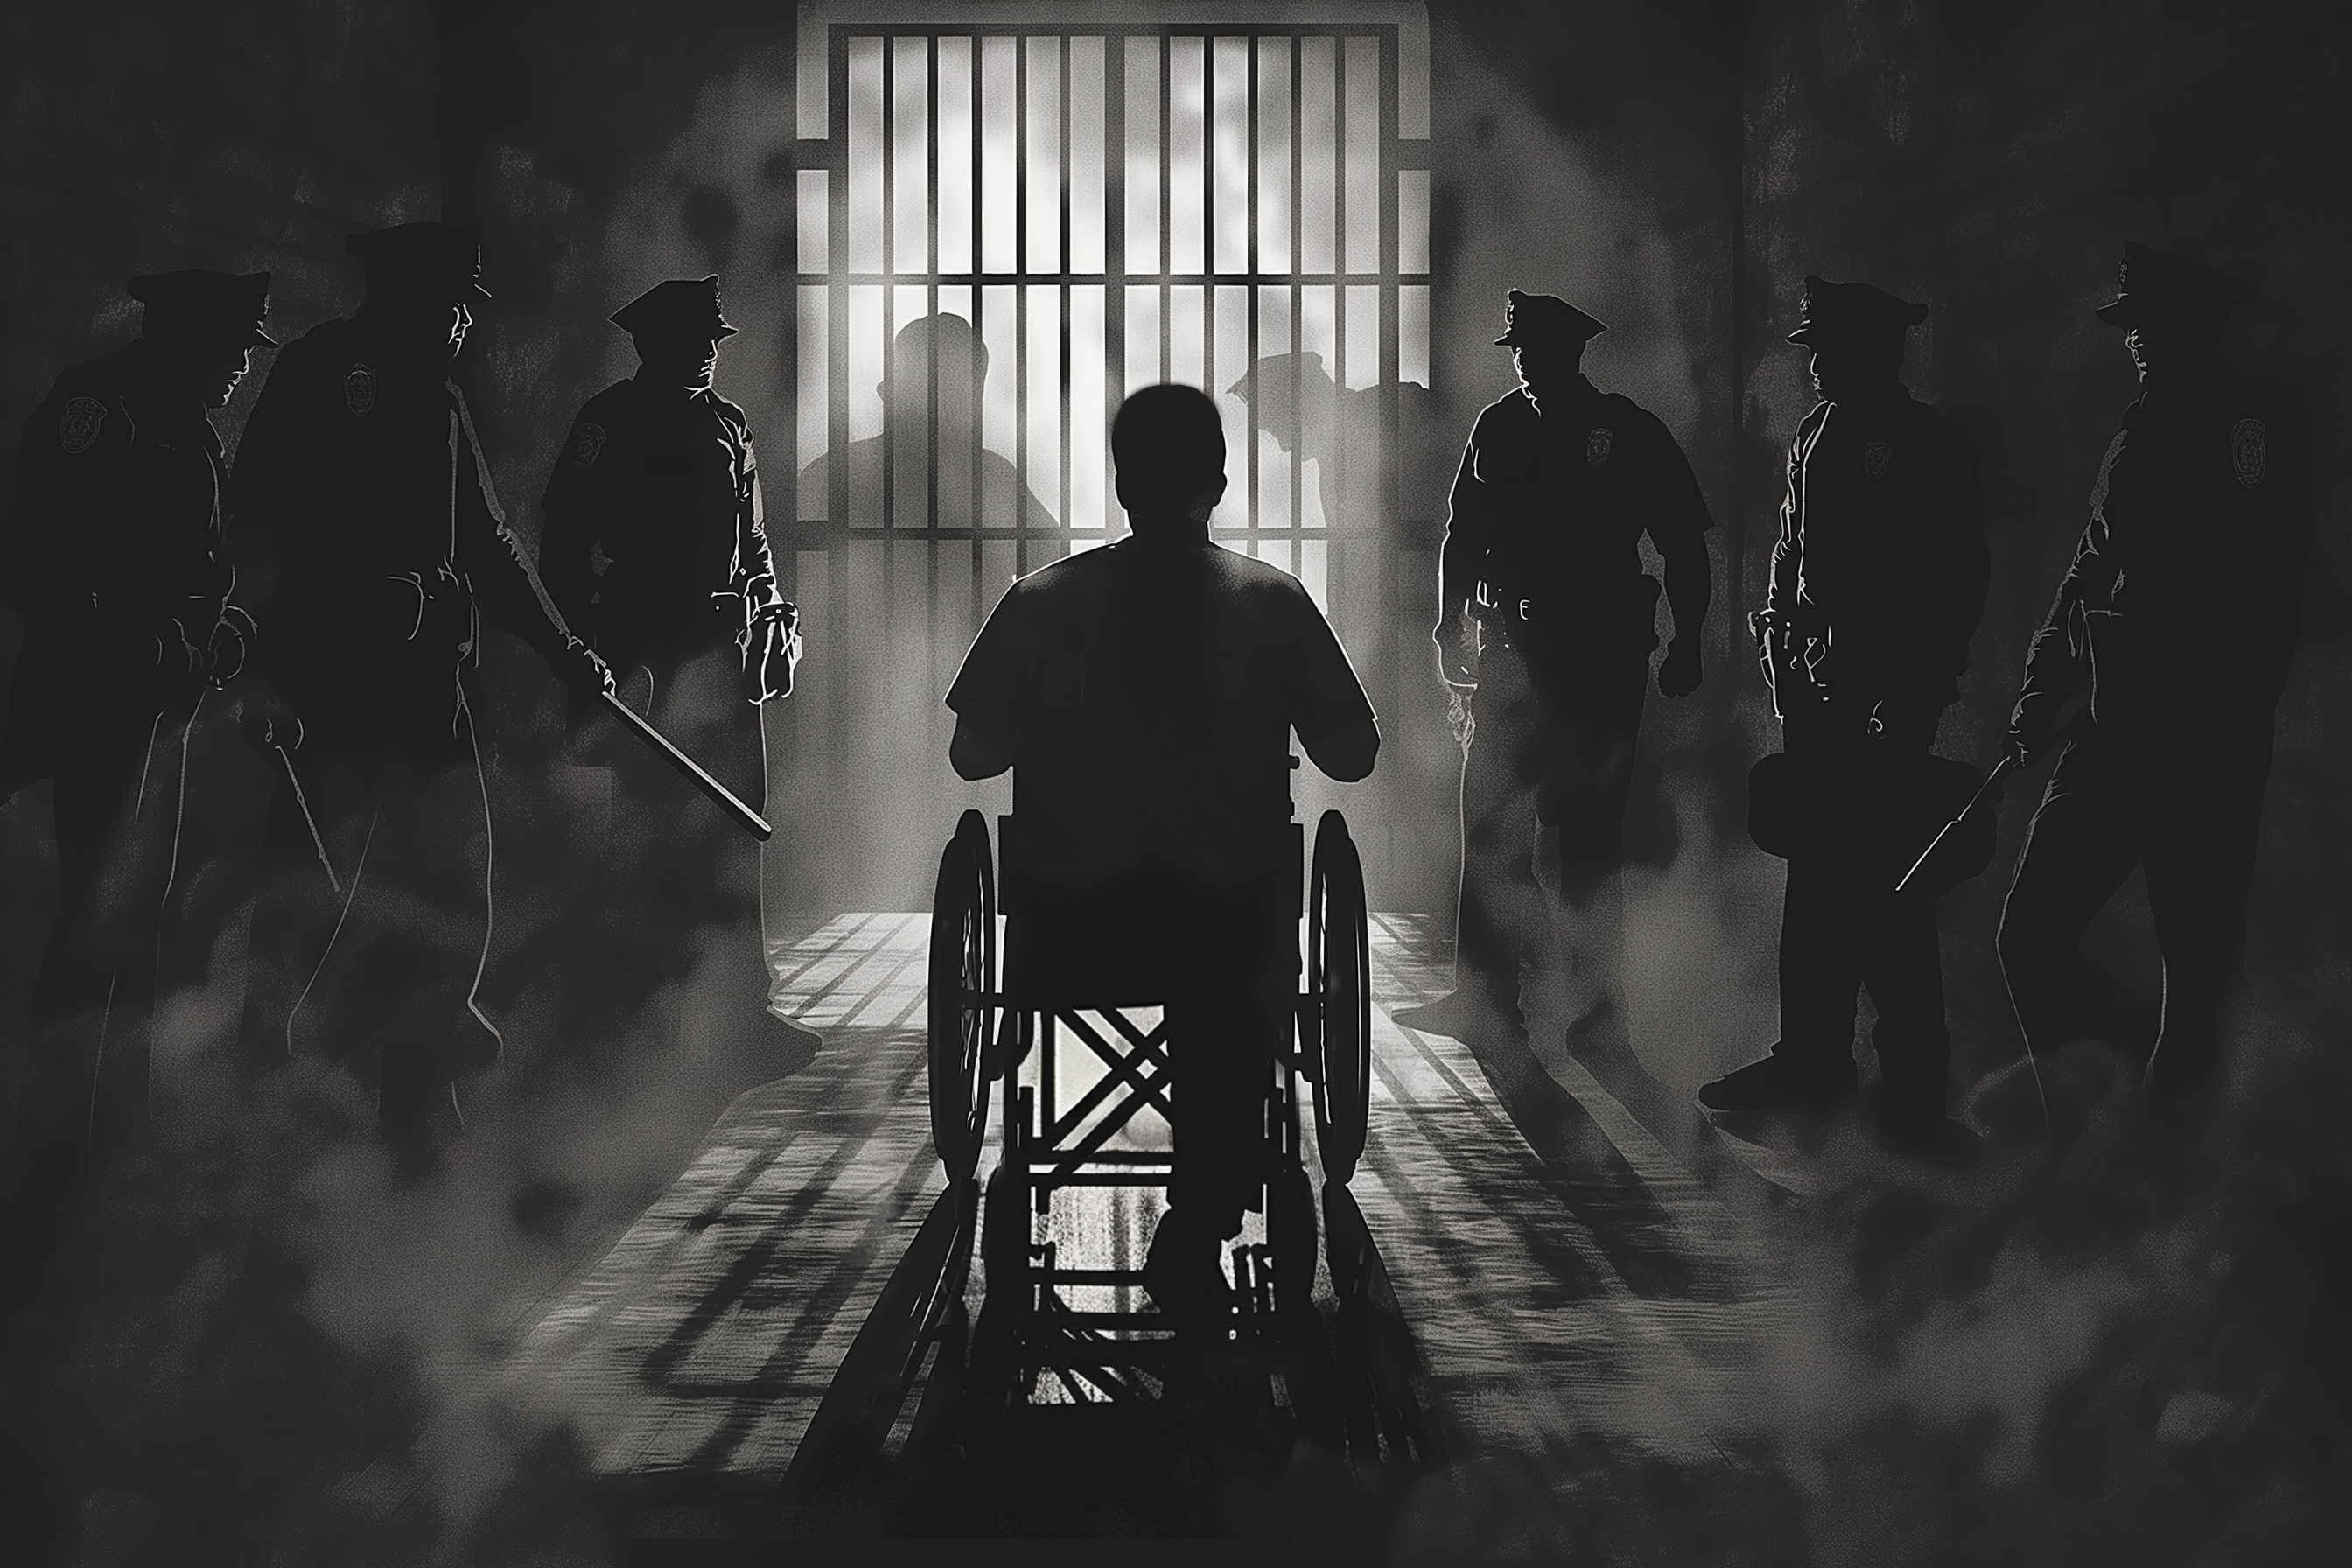 A man in a wheelchair is surrounded by police officers in a dimly lit, foggy prison hallway. The prison bars and shadowy figures are visible in the background.